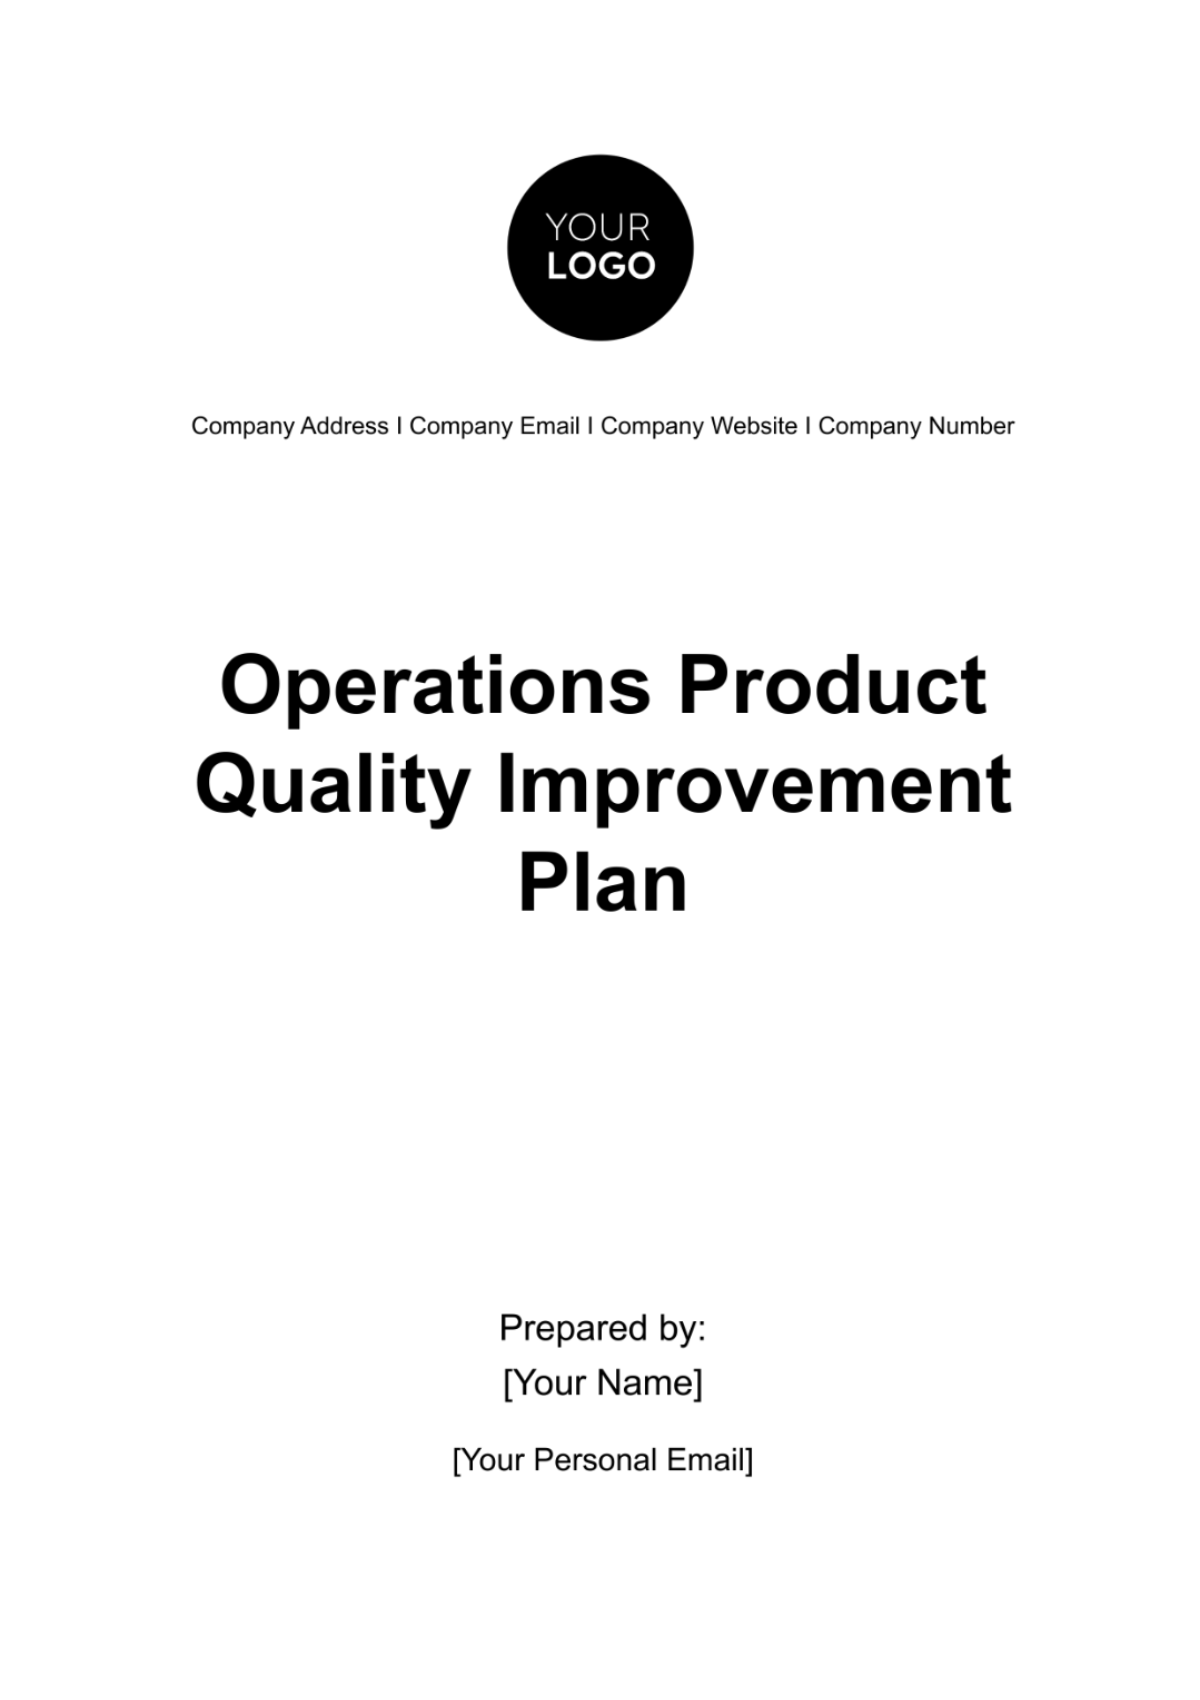 Operations Product Quality Improvement Plan Template